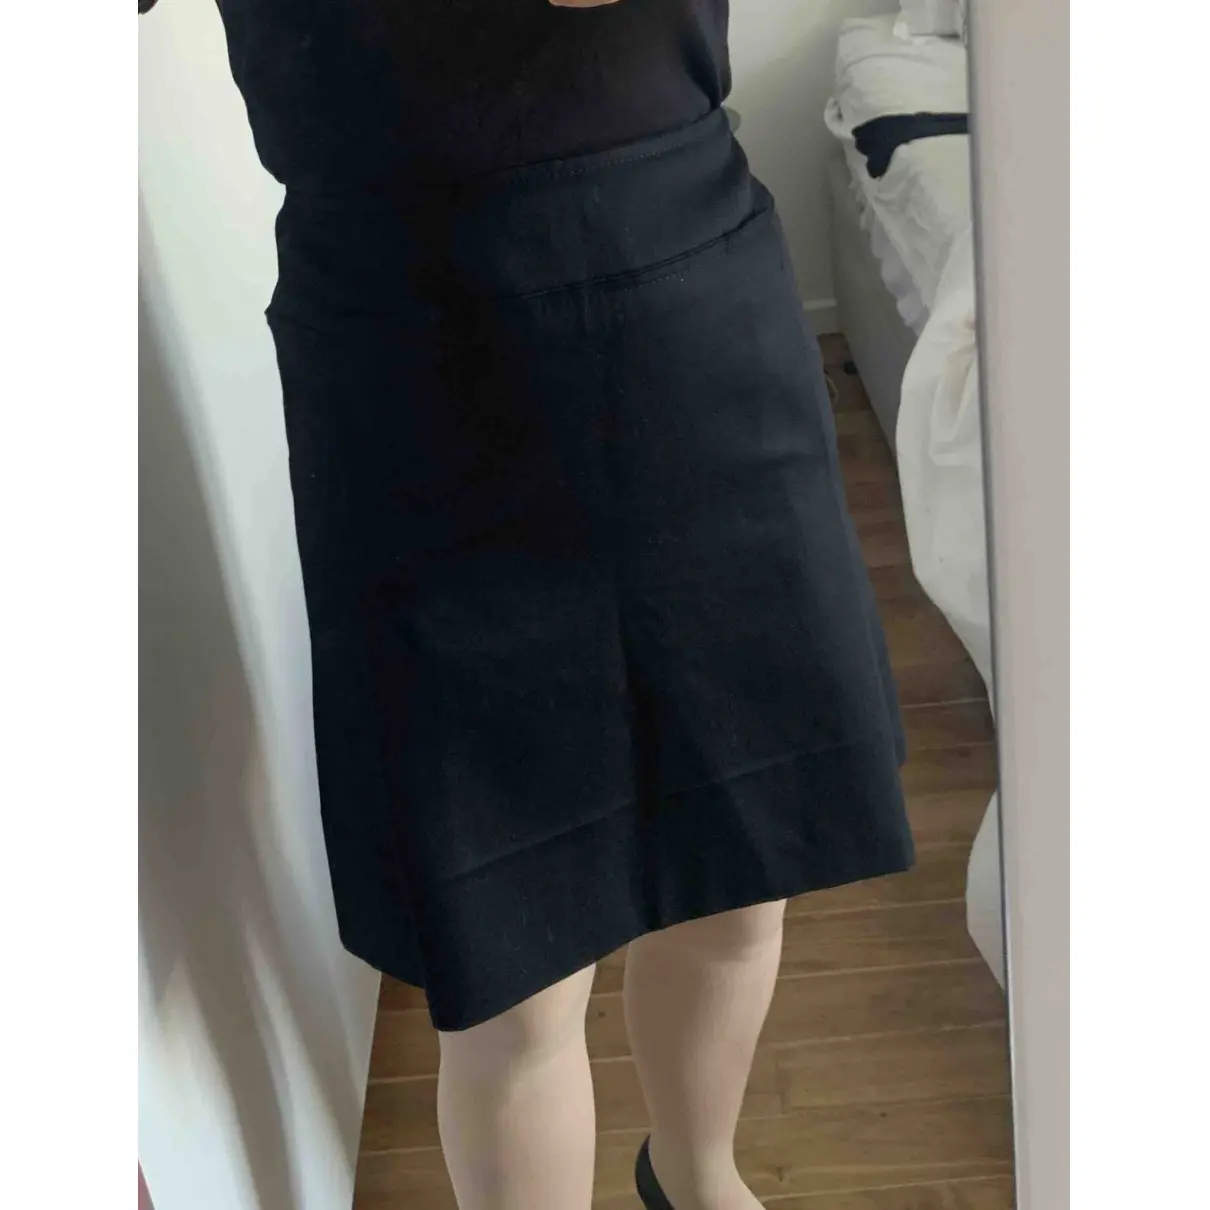 Christian Lacroix Wool mid-length skirt for sale - Vintage